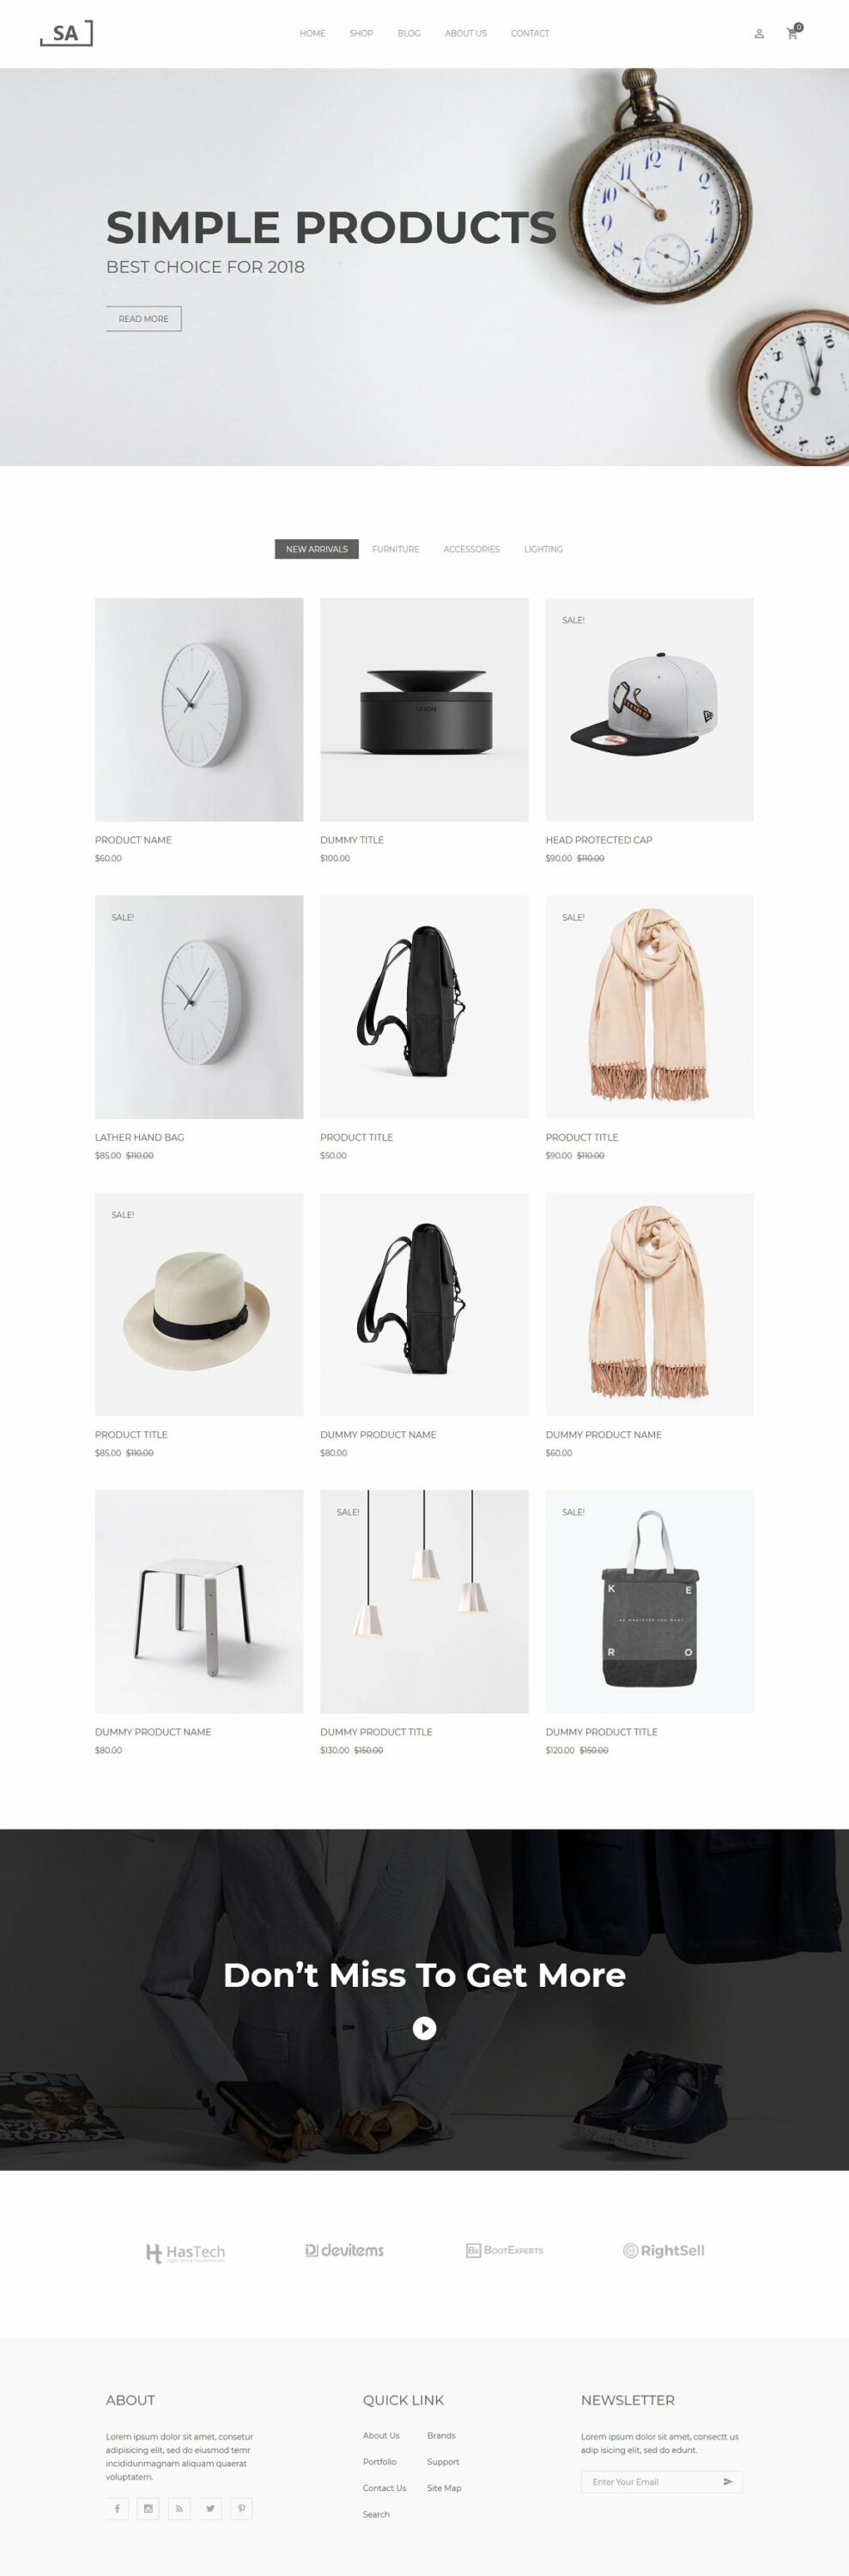 Image of stylish clothes and headwear.